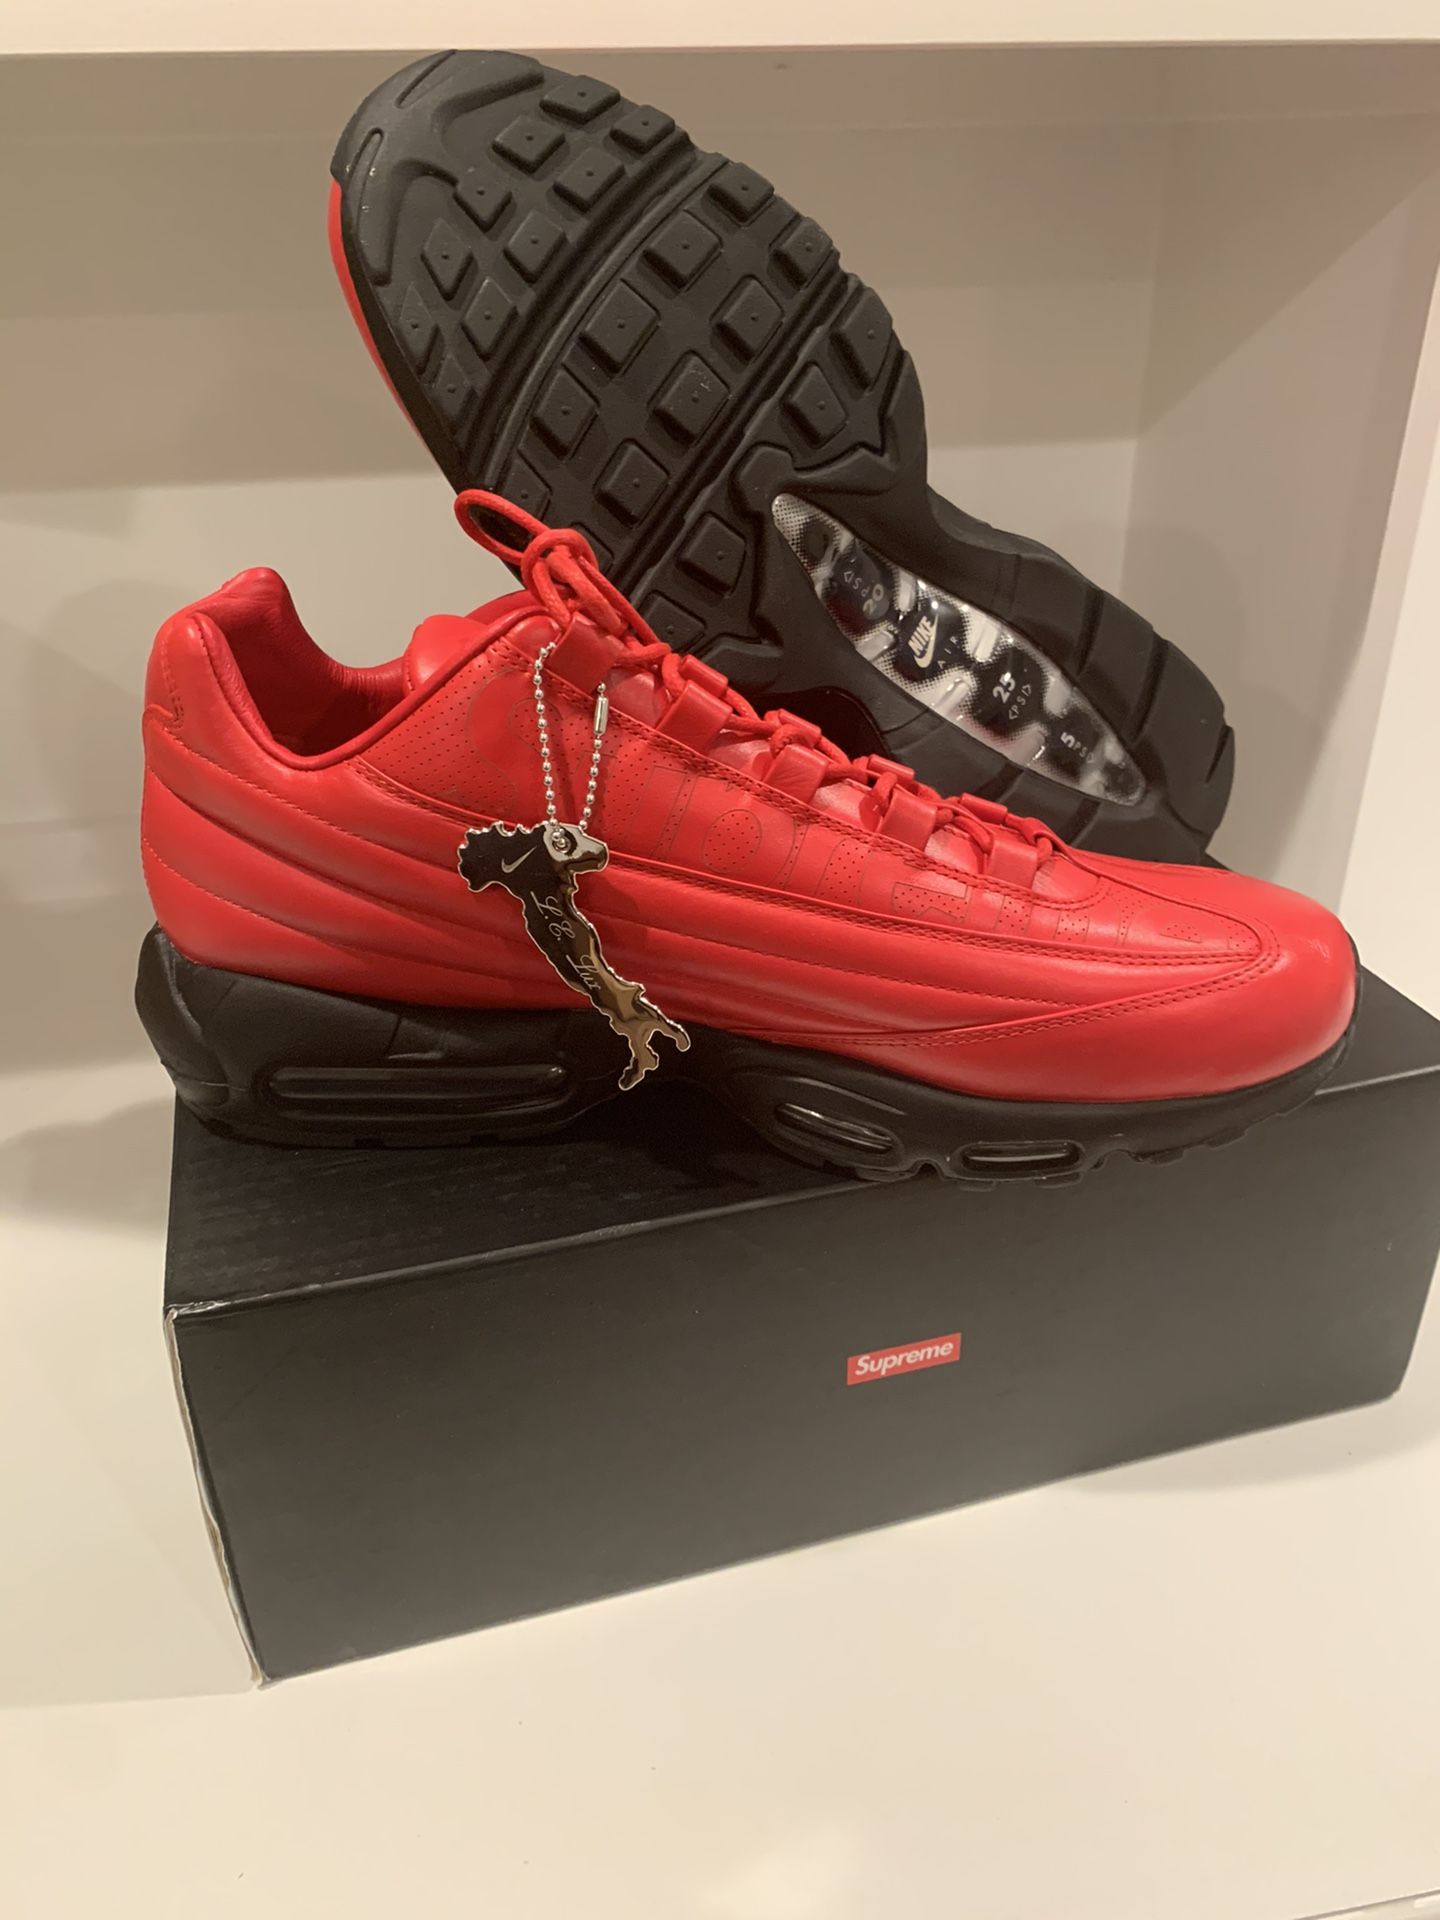 Air Max Lux/ Supreme ‘Gym Red’ size 13